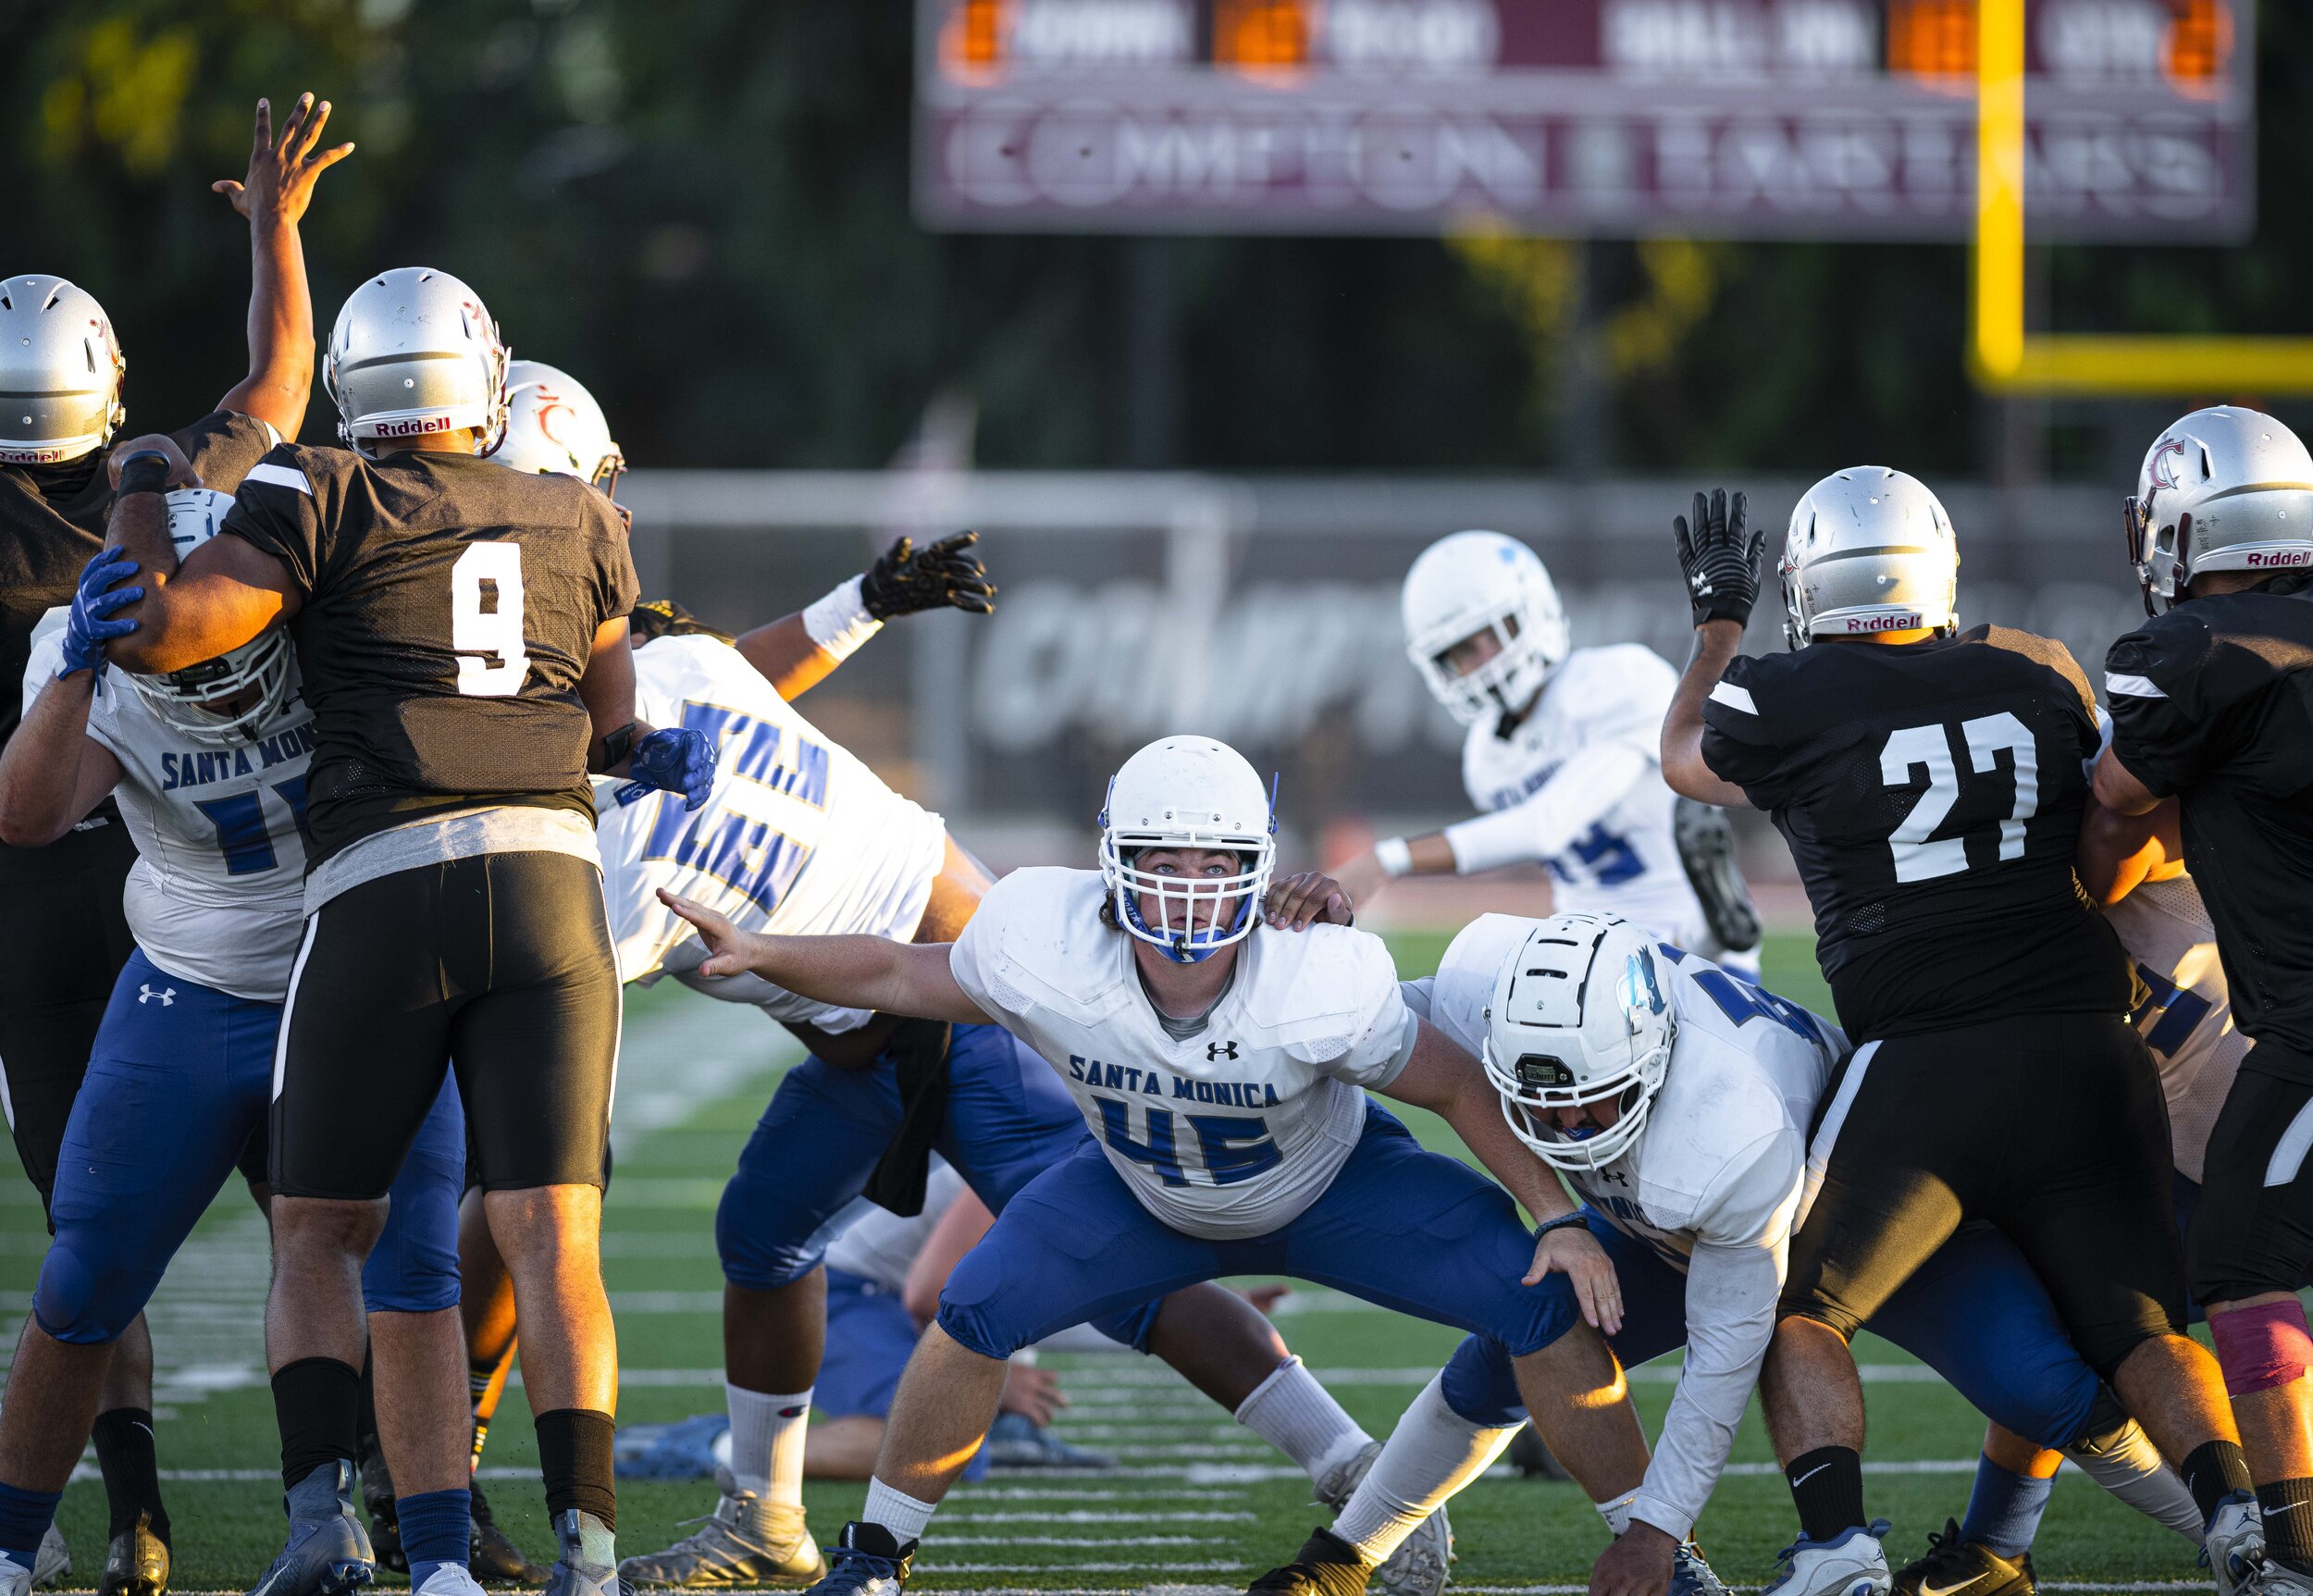  Santa Monica College center , Nathan Hall (45), stands ready to block on an extra point attempt, after the first touchdown of the game on September 11, 2021, at Compton College Compton Calif. (Jon Putman | The Corsair) 